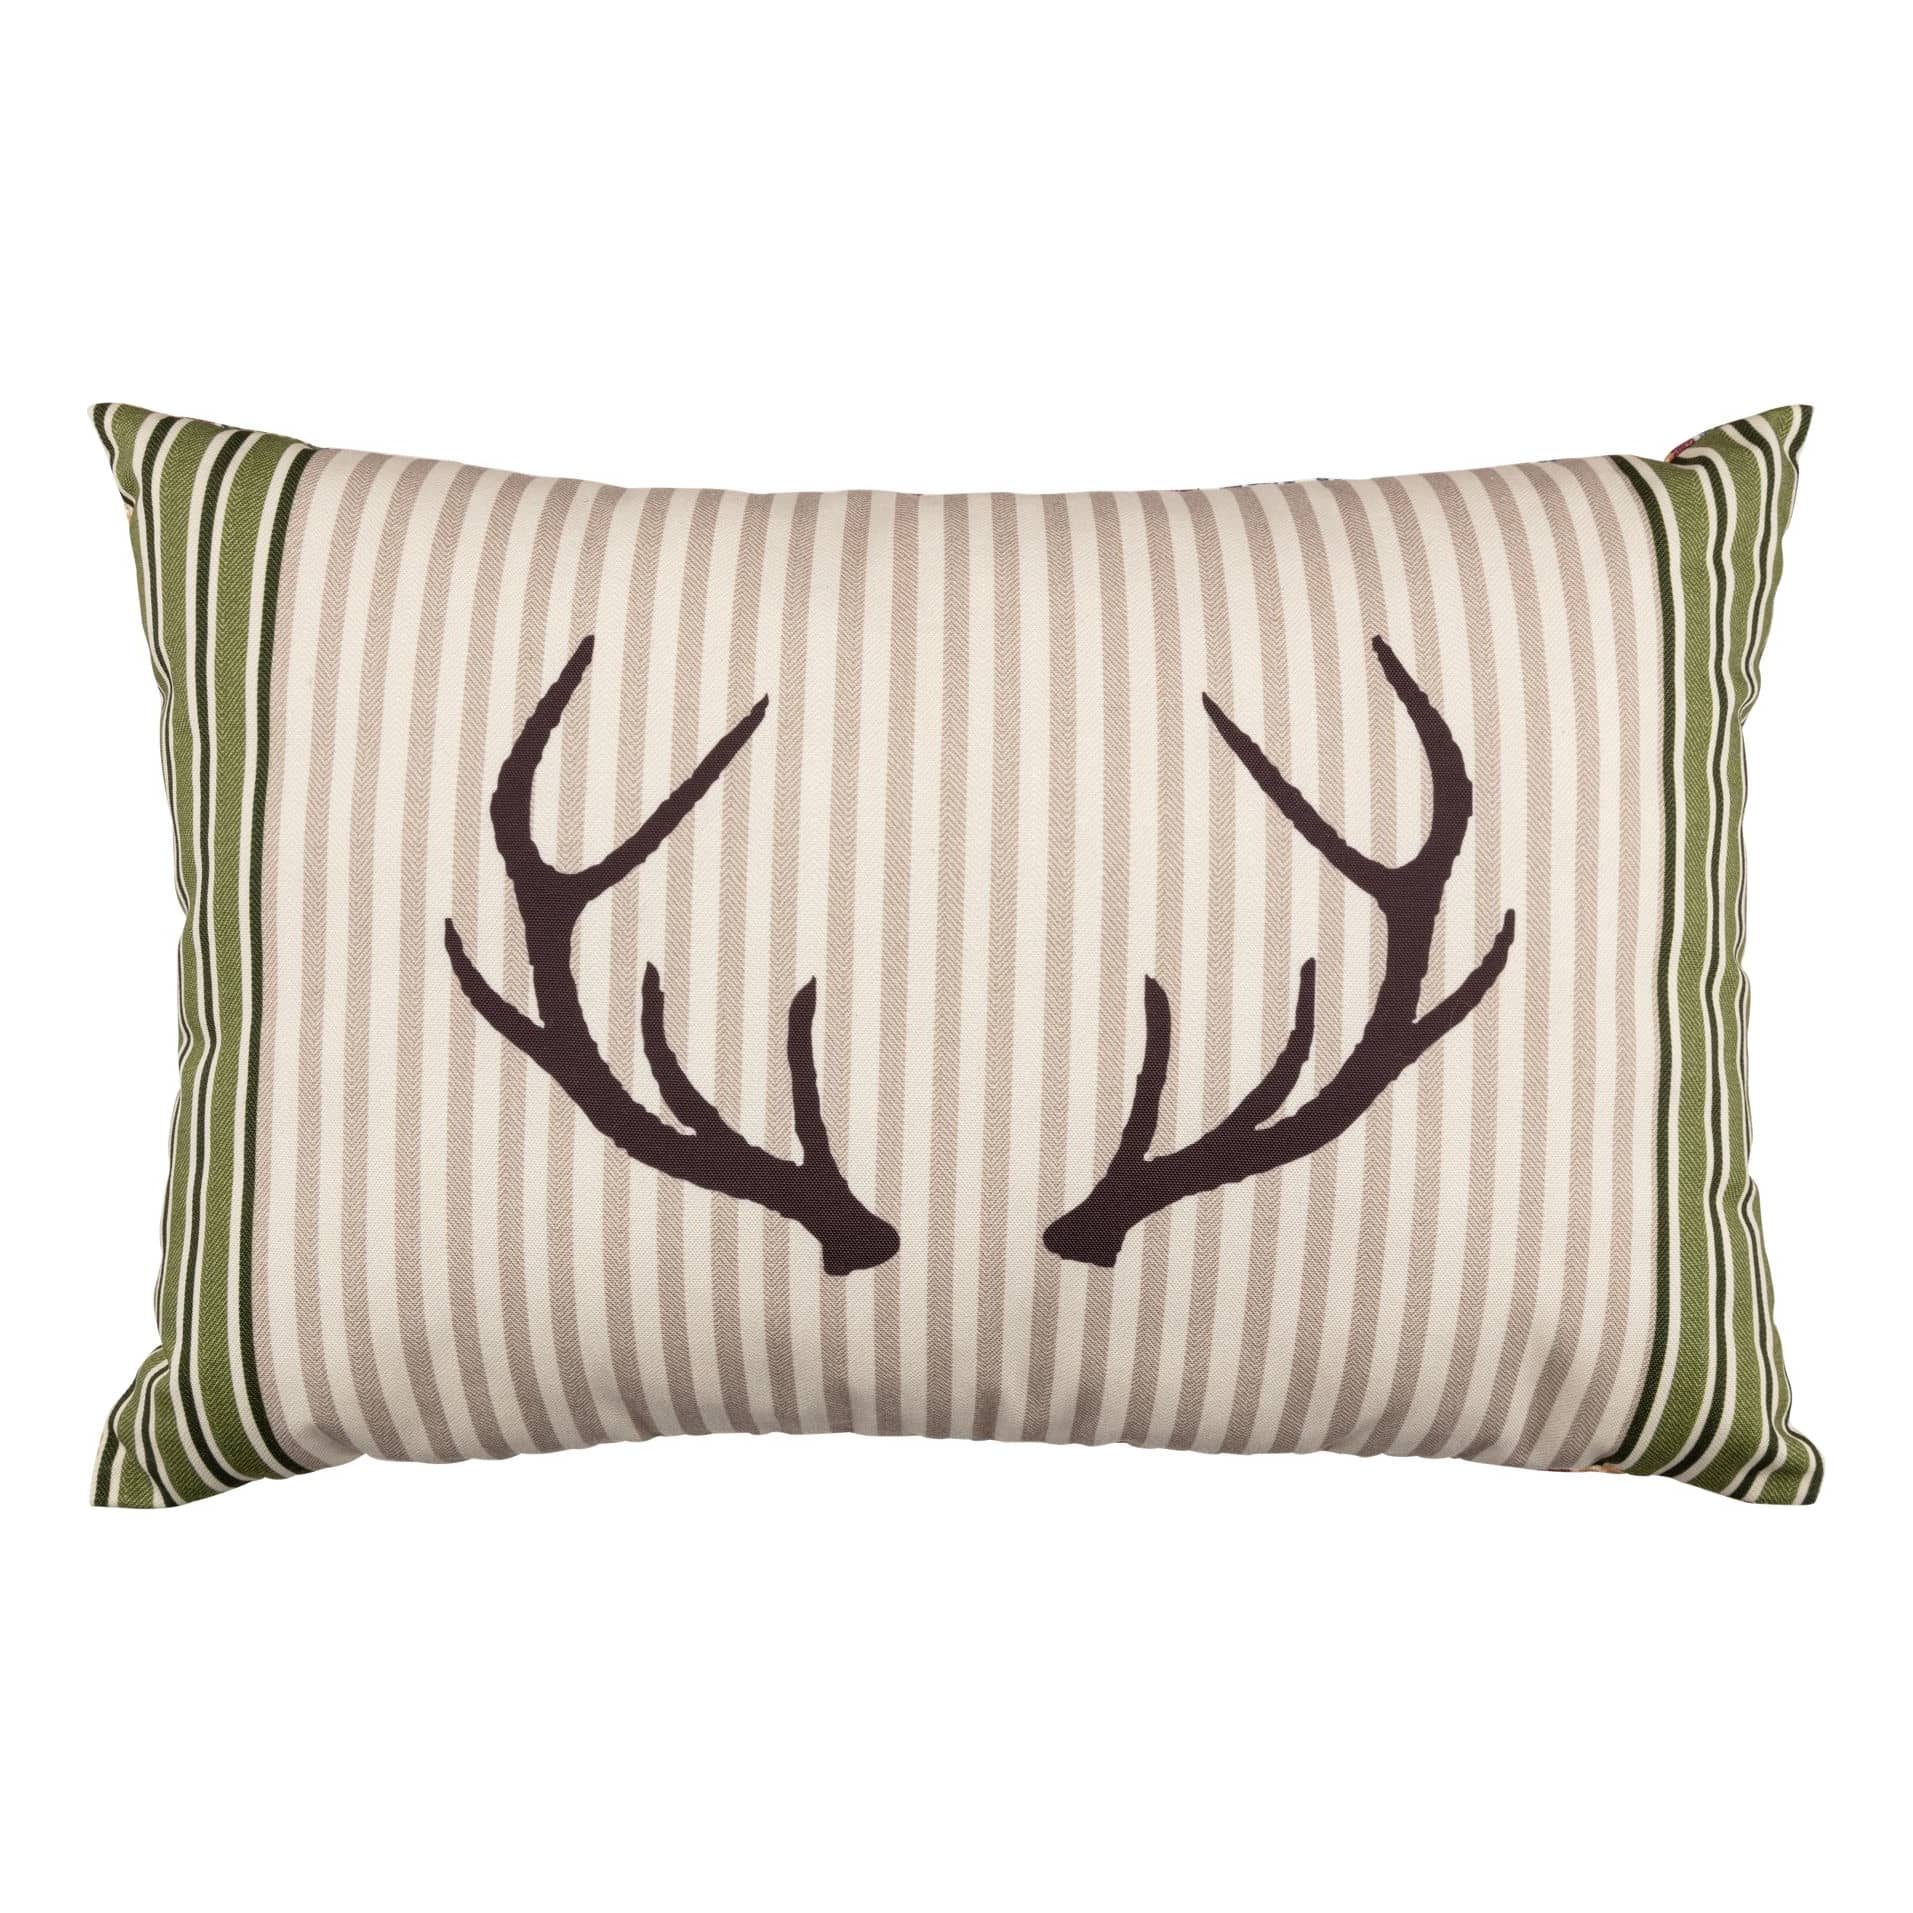 White River™ Home Antler™ and Stripes Outdoor Decorative Pillow